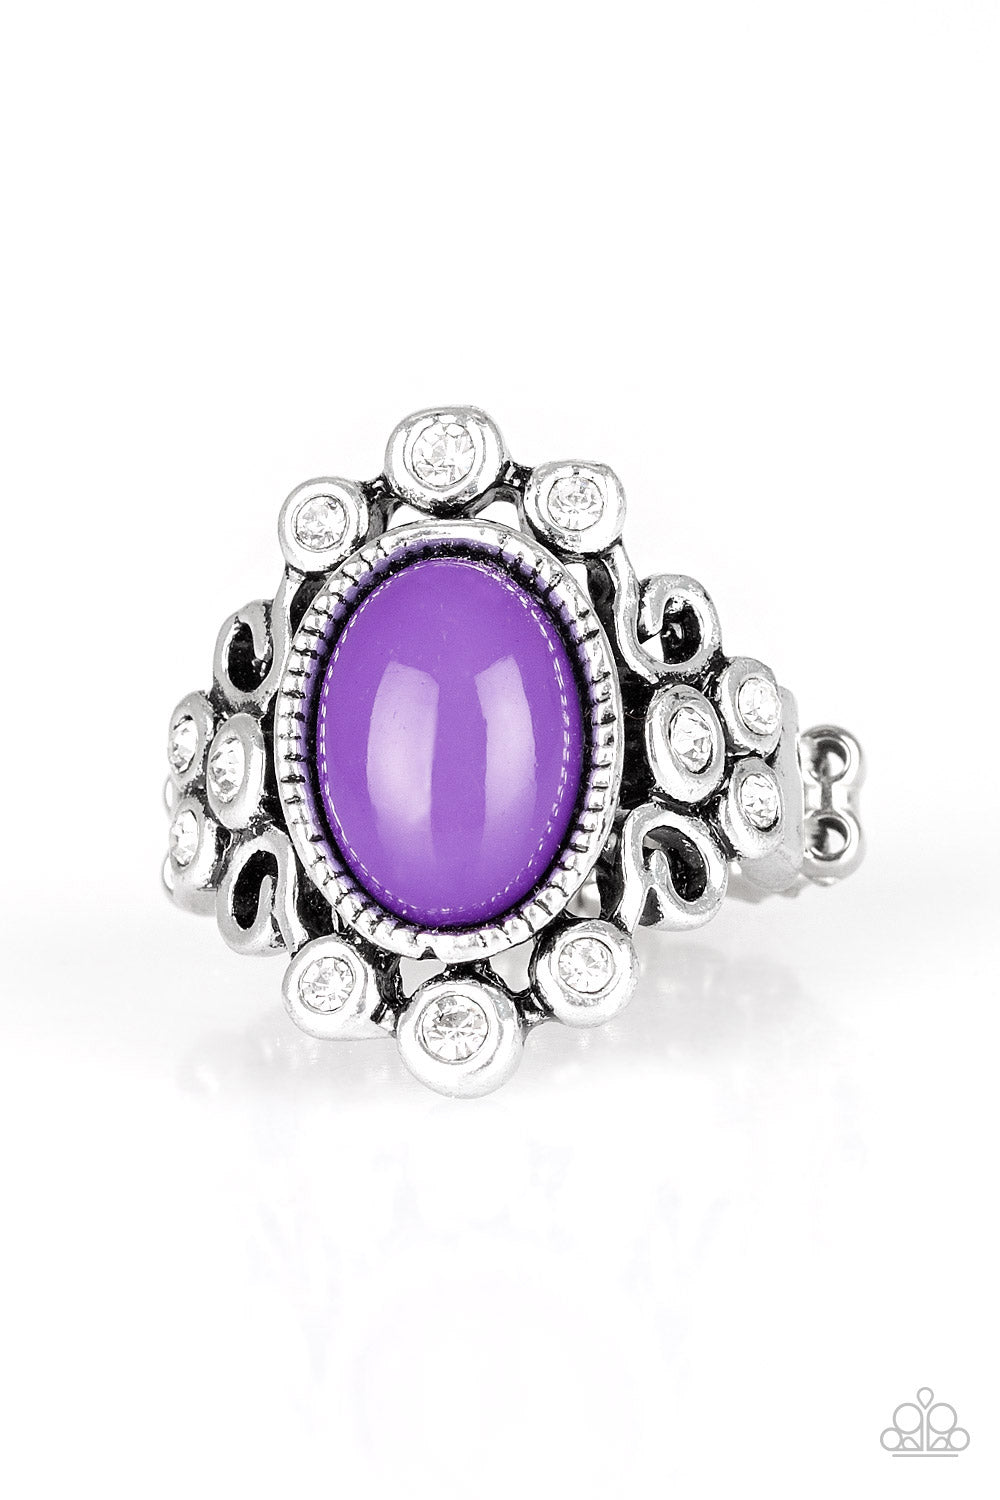 five-dollar-jewelry-noticeably-notable-purple-ring-paparazzi-accessories